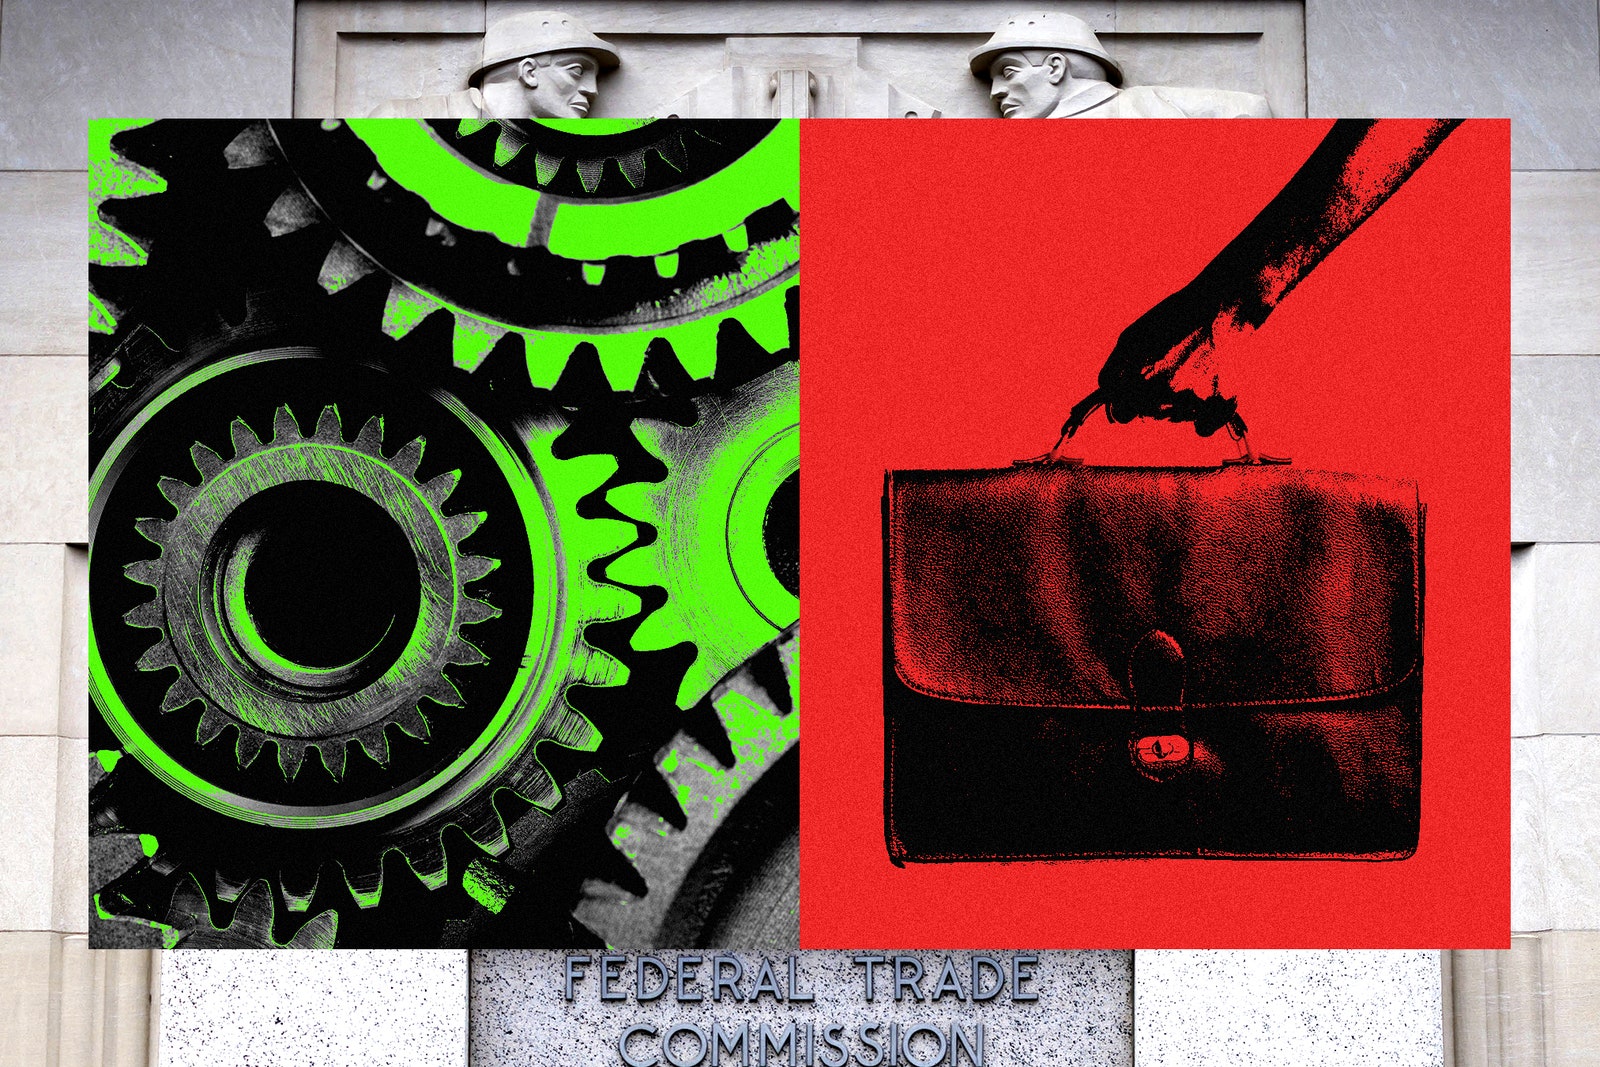 Photo collage of machine gears a briefcase and the FTC building